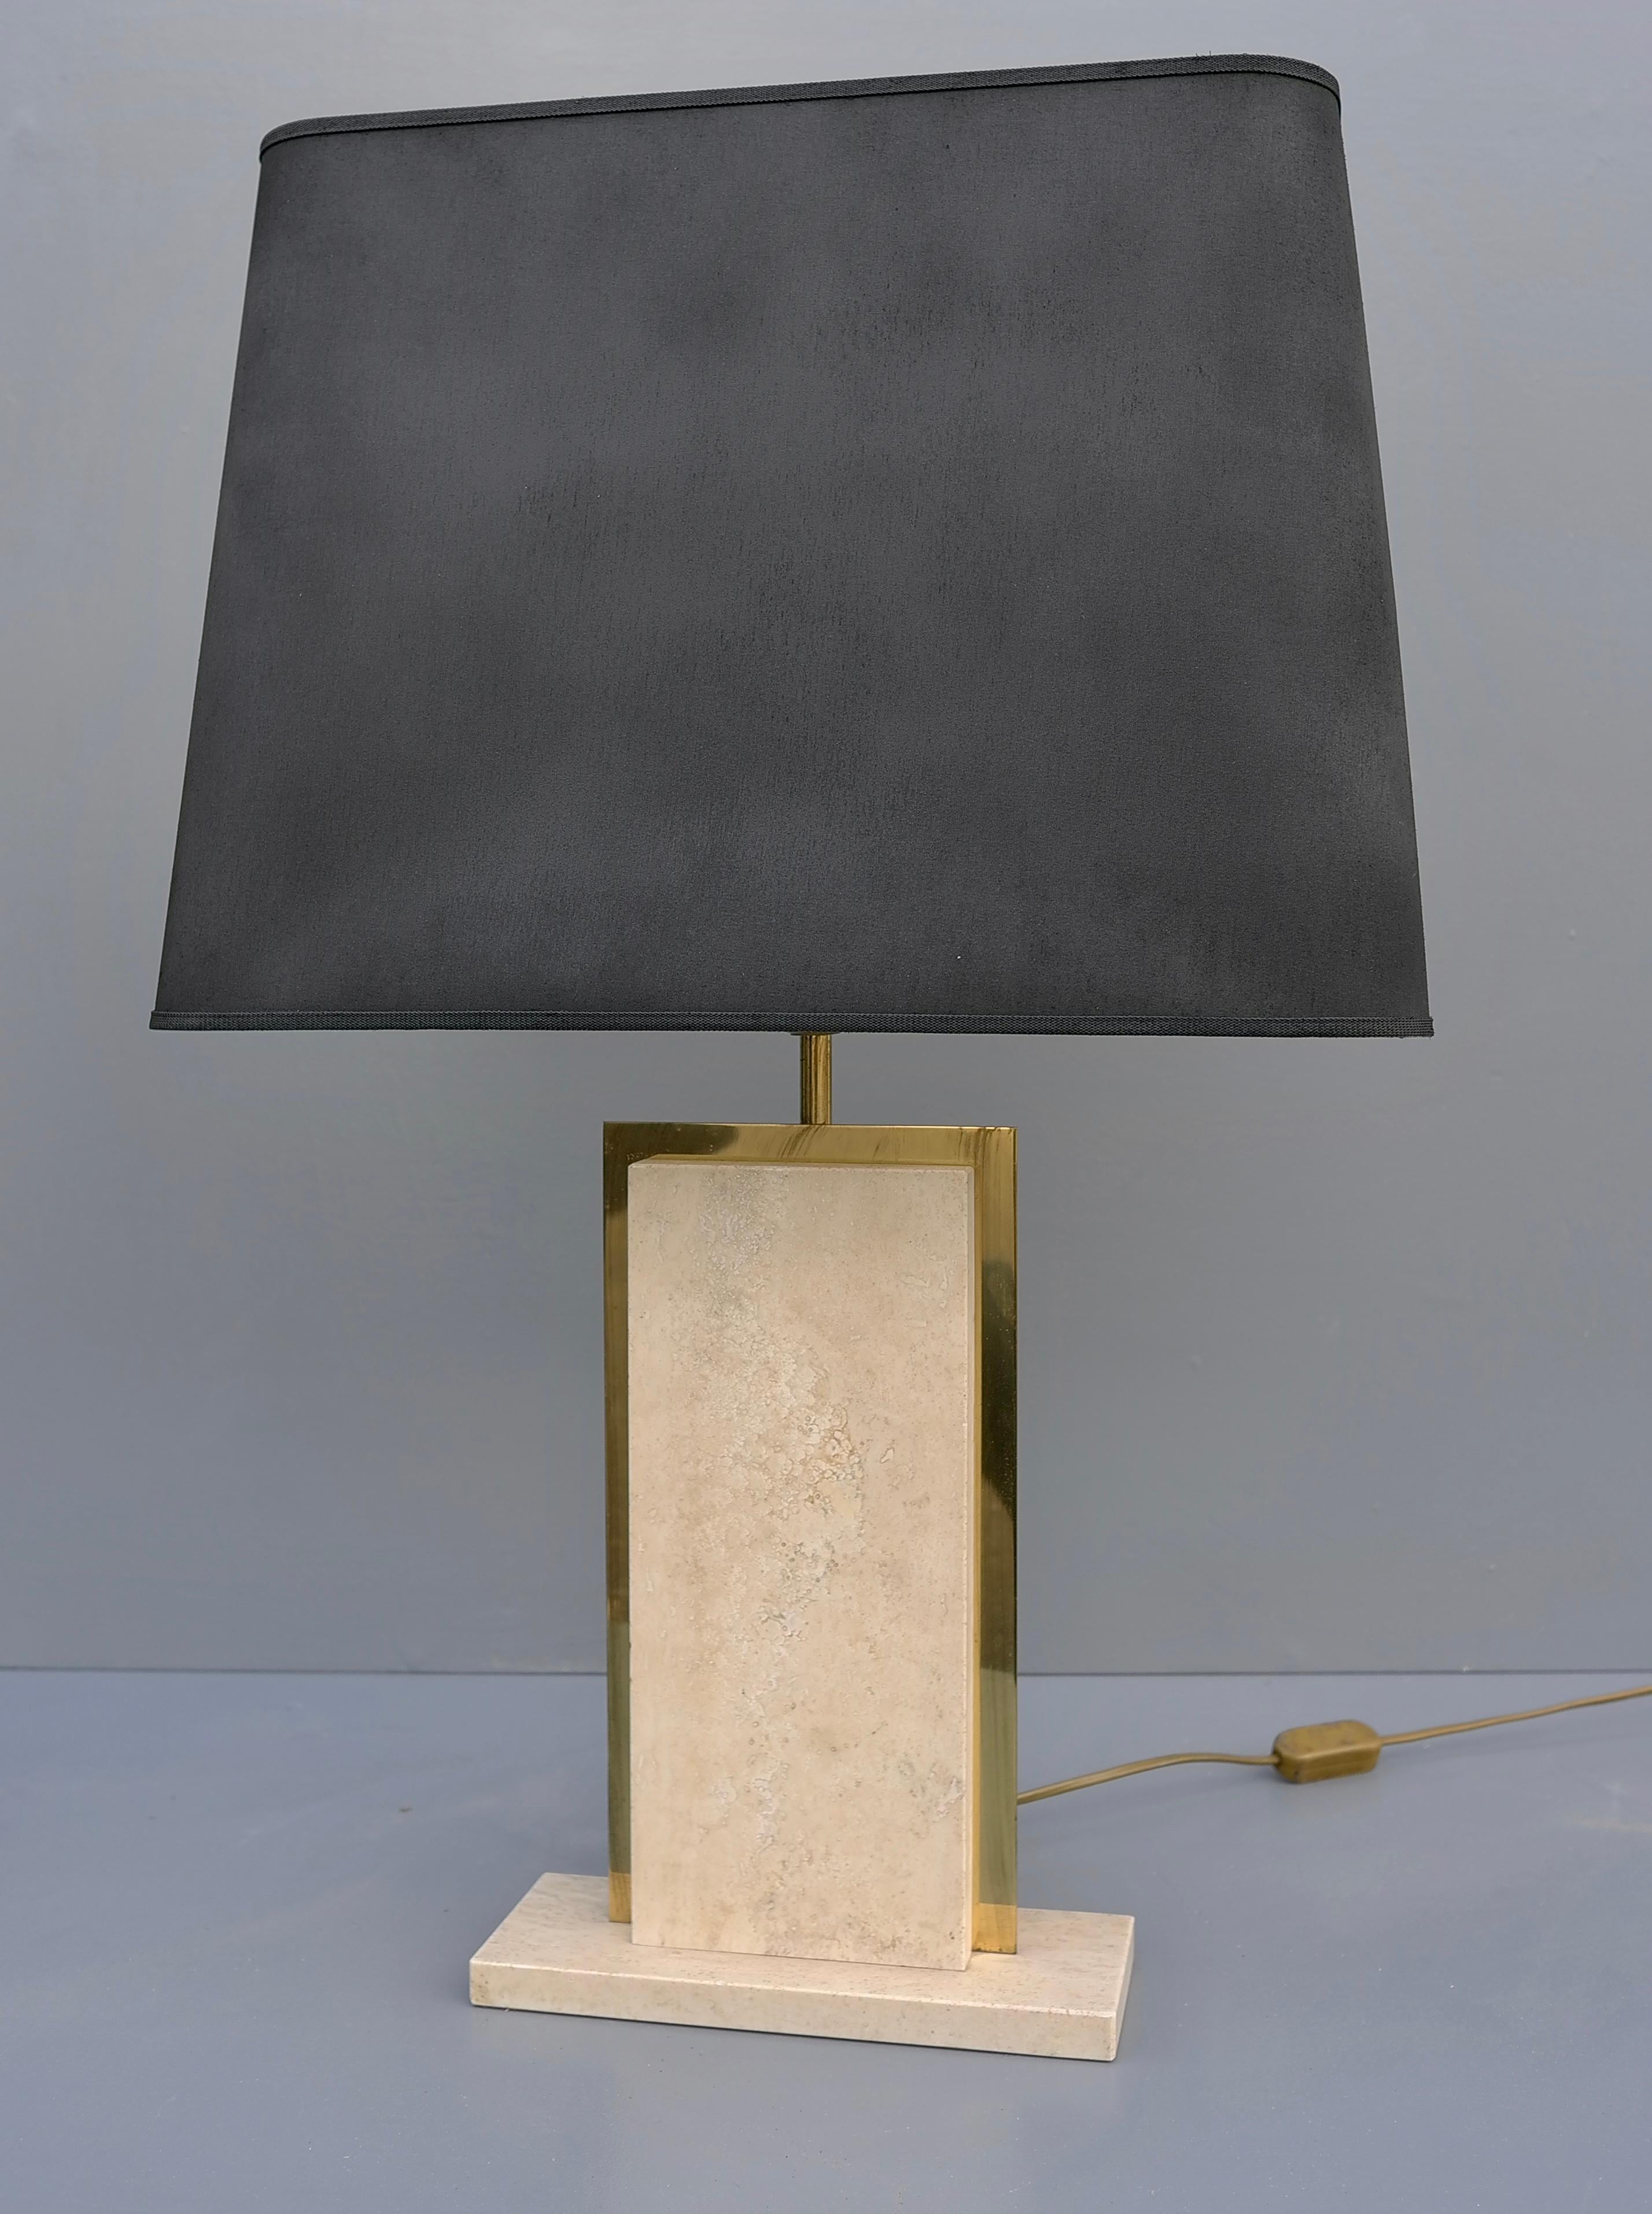 Travertine and Brass Sculptural Mid-Century Modern Table Lamps, Belgium 1970's For Sale 2